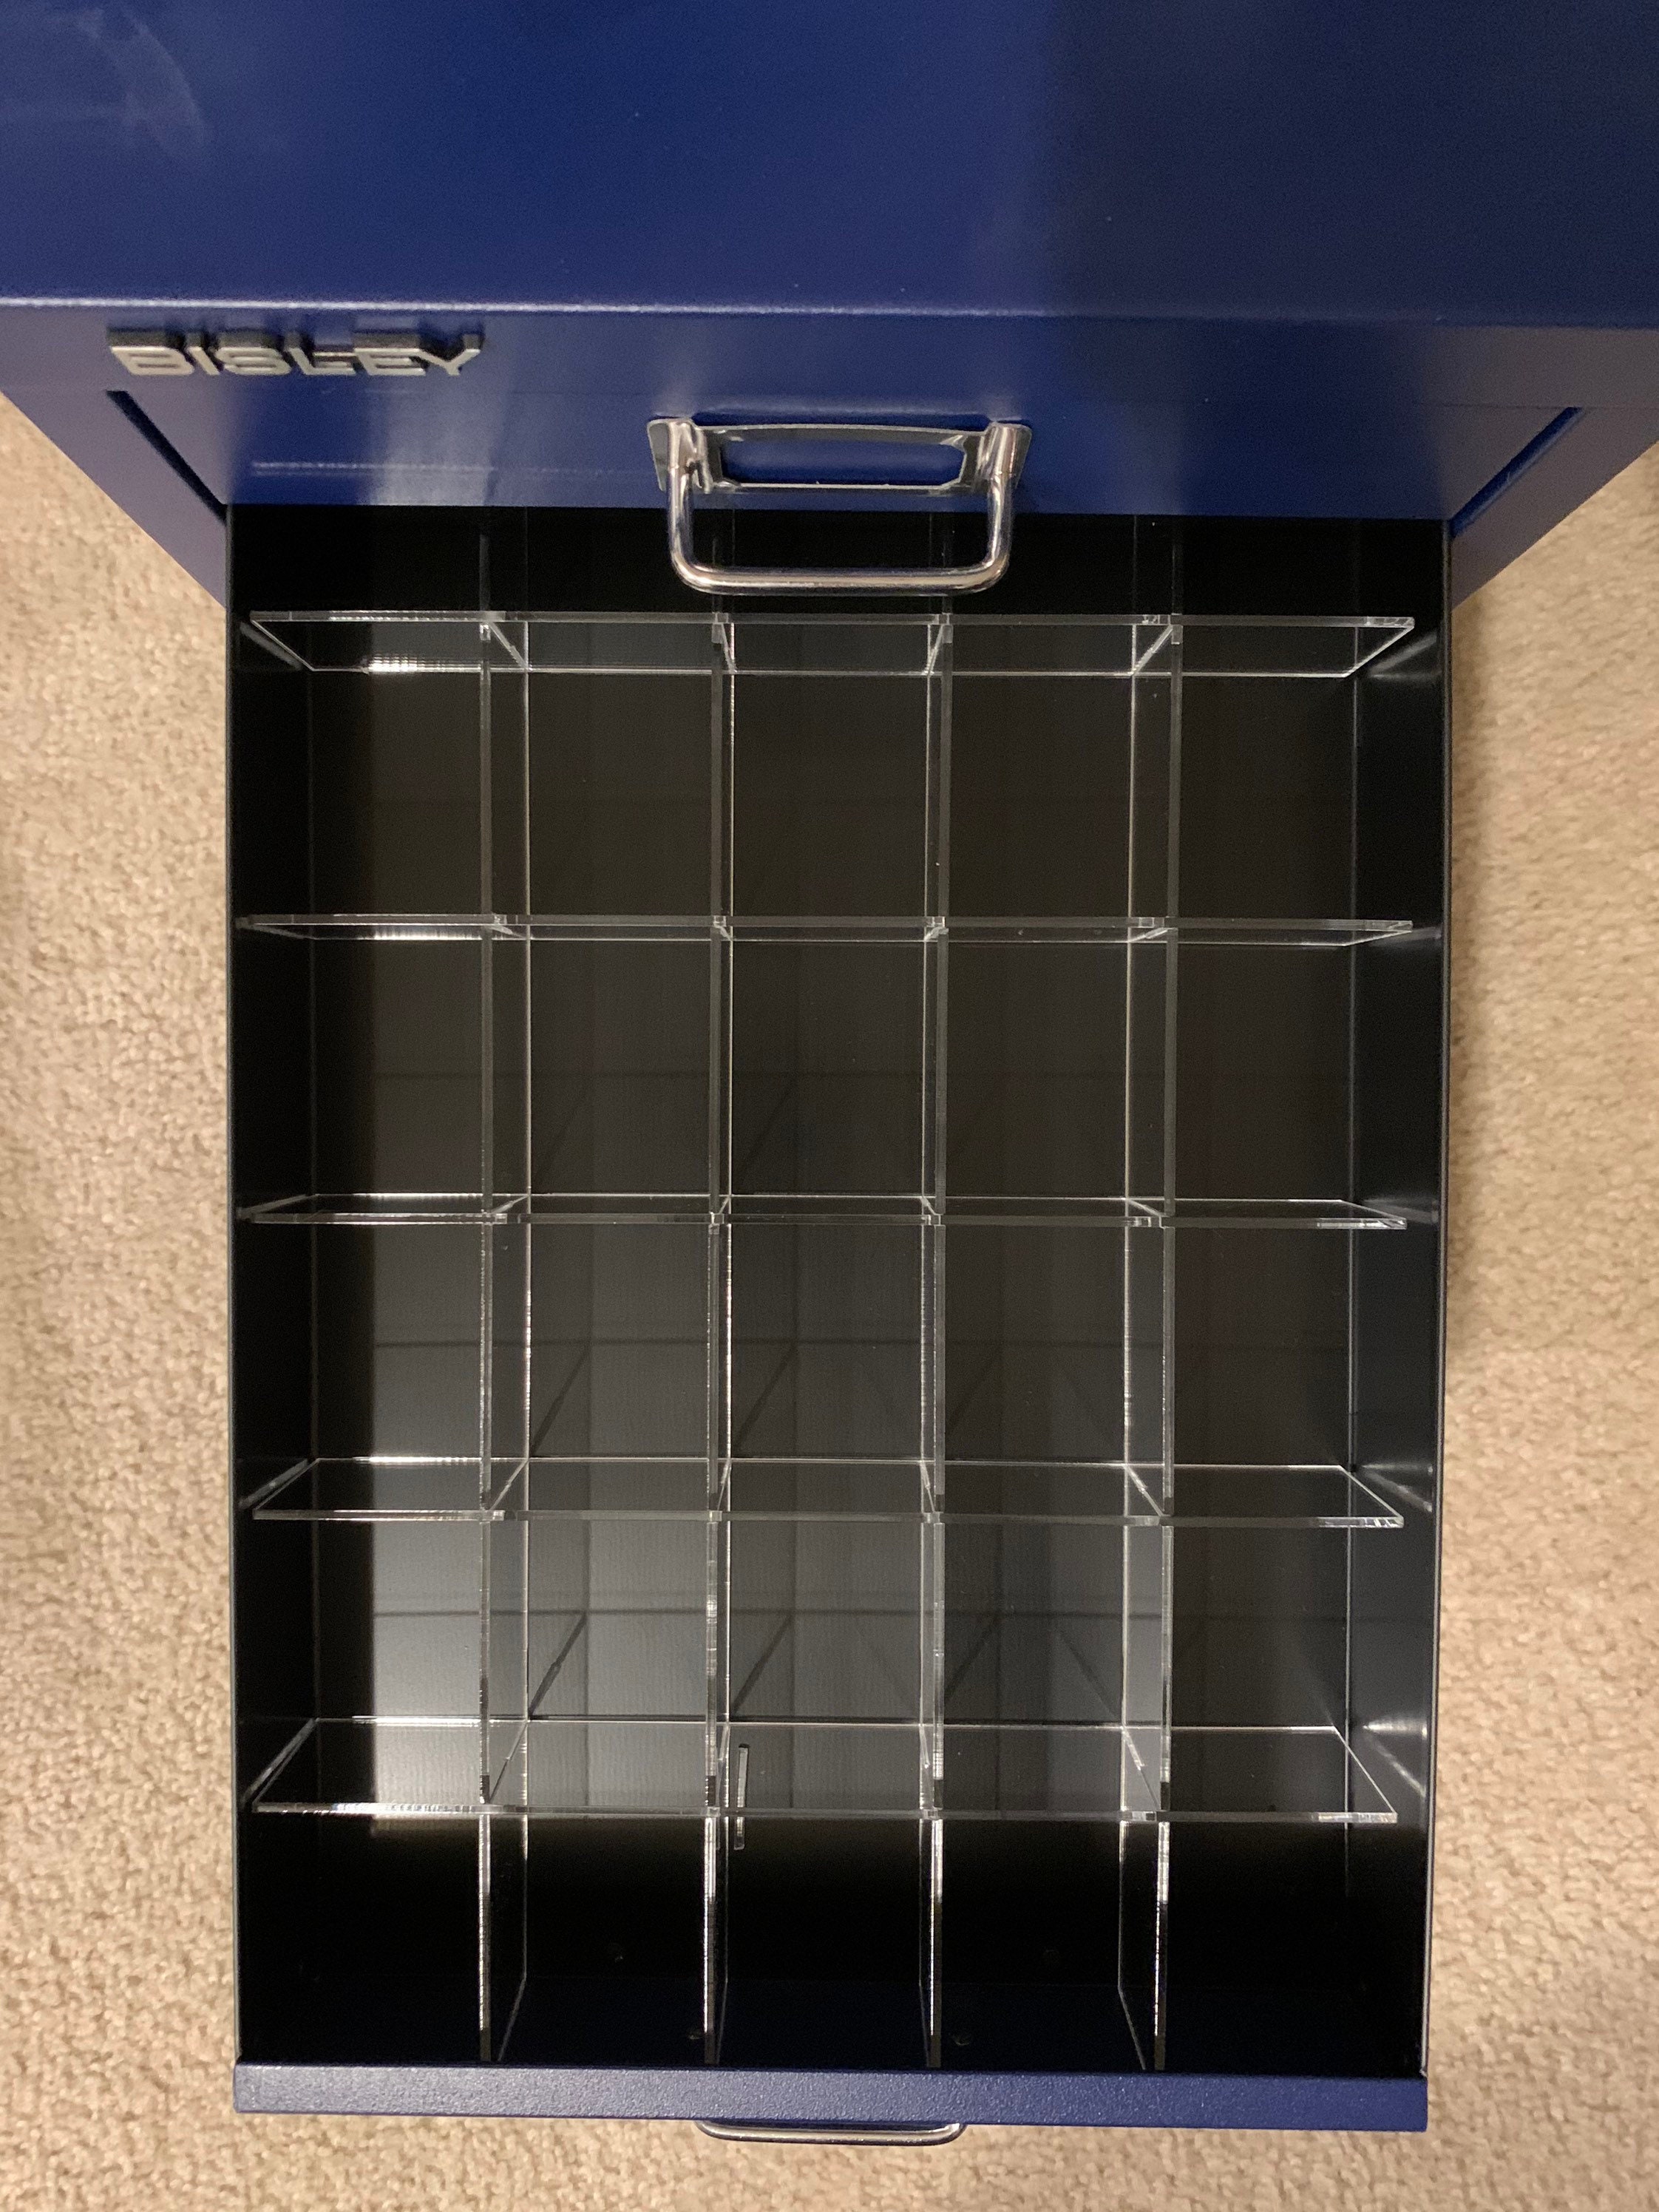 Acrylic drawer dividers maximize the use of this drawer for ties